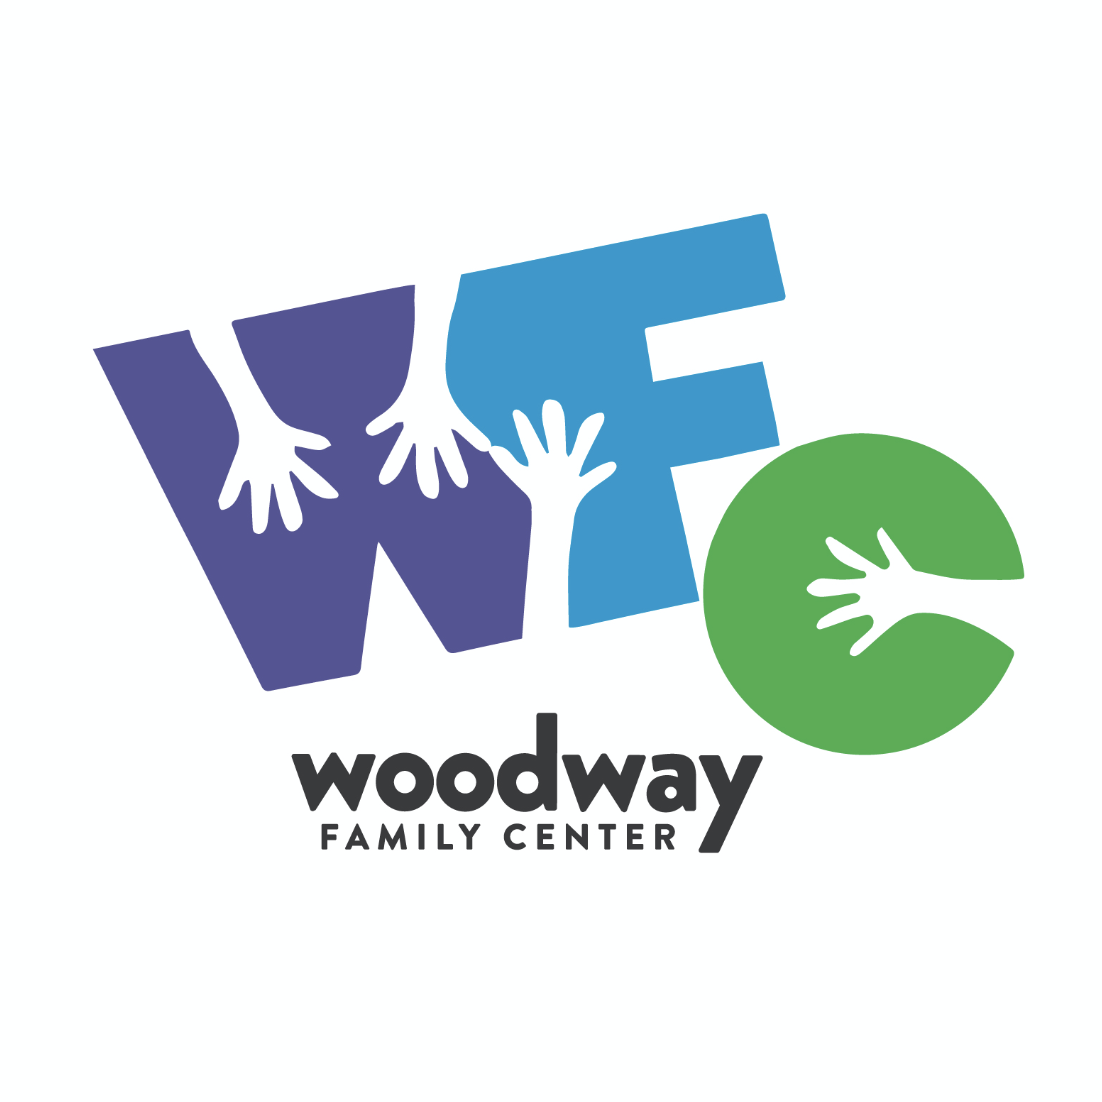 Woodway Family Center